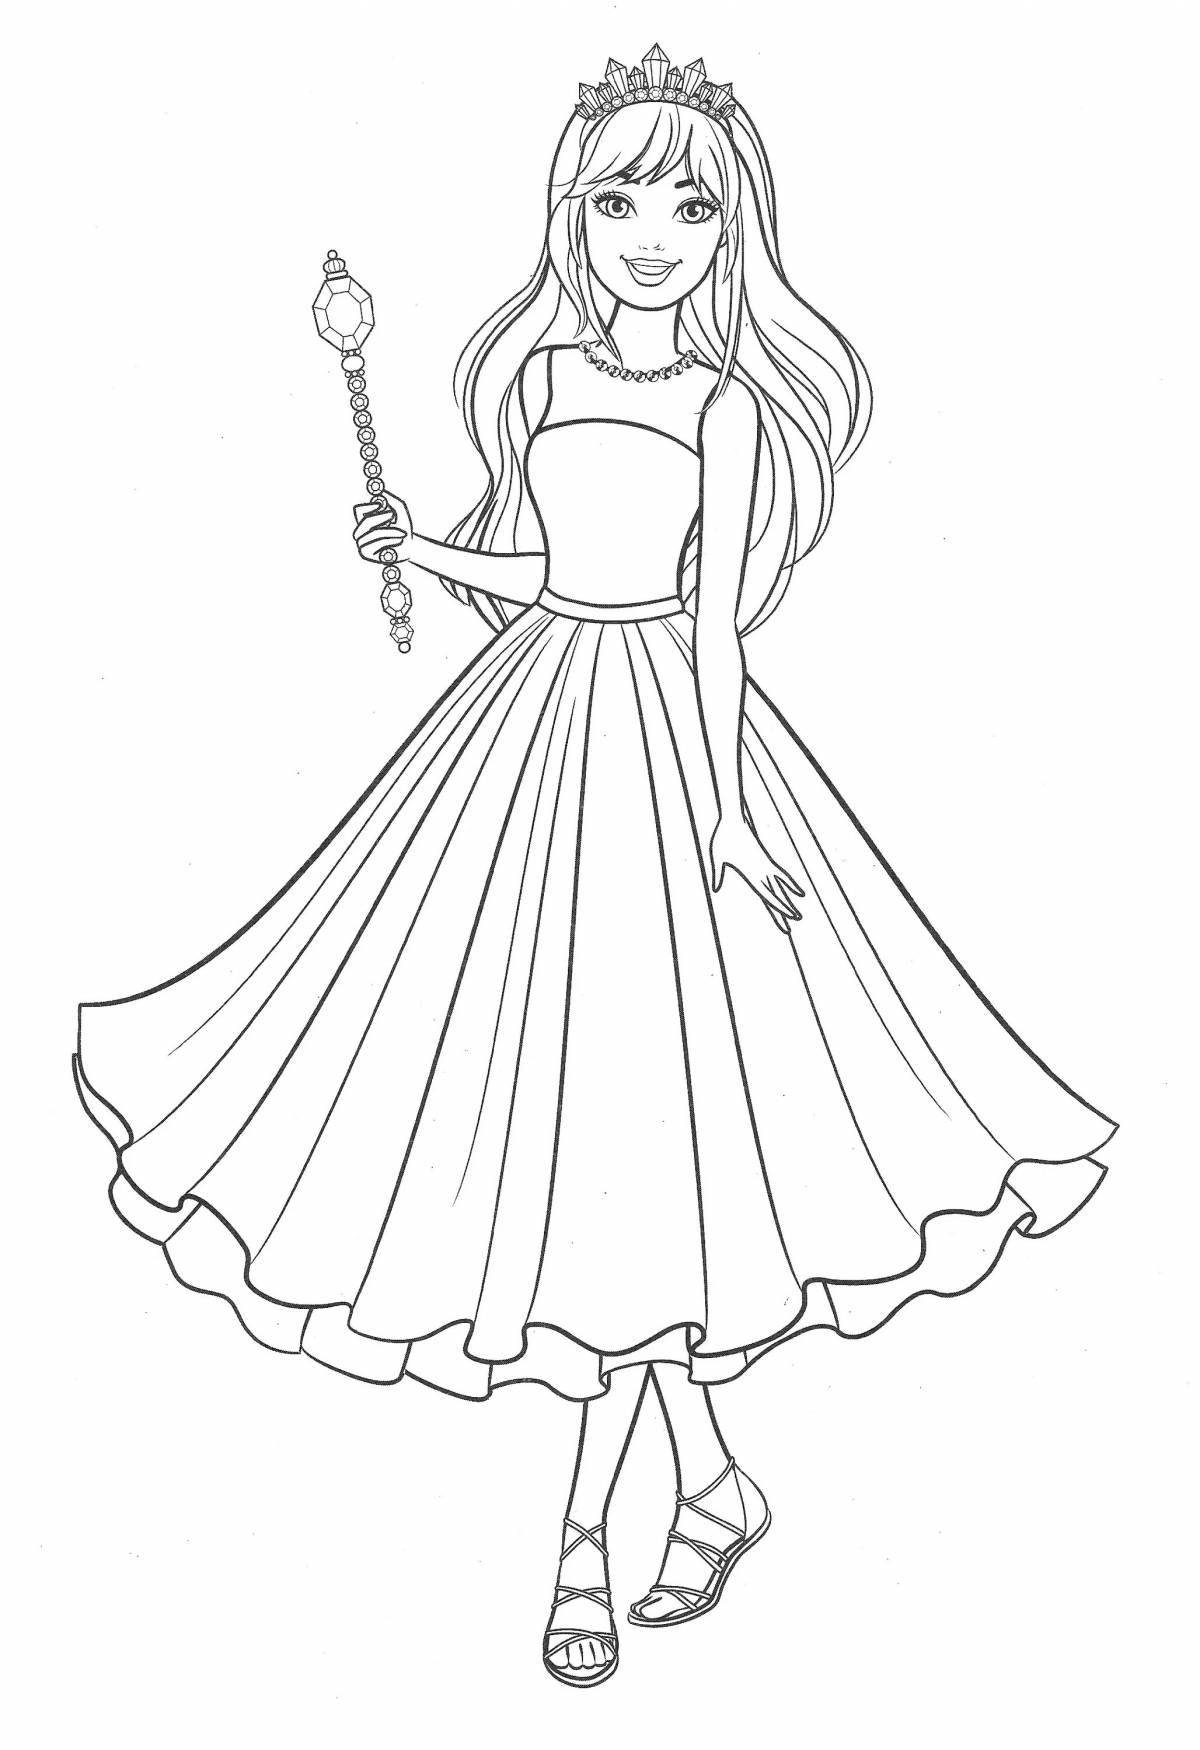 Live coloring of barbie in a puffy dress